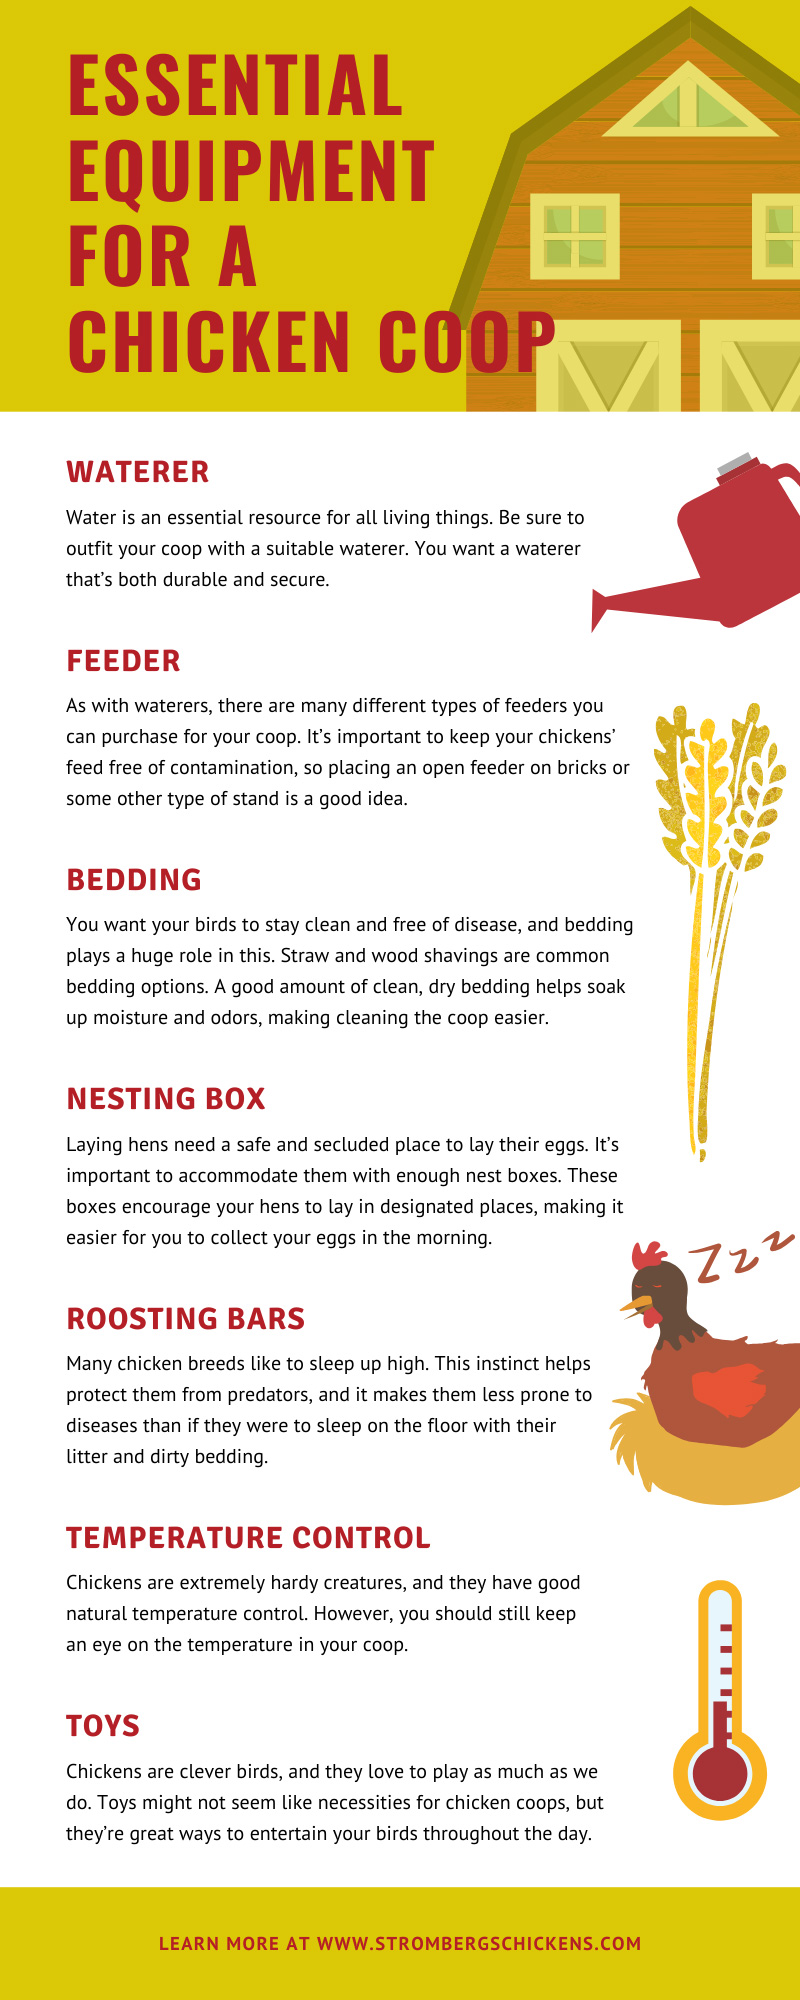 Essential Equipment For a Chicken Coop